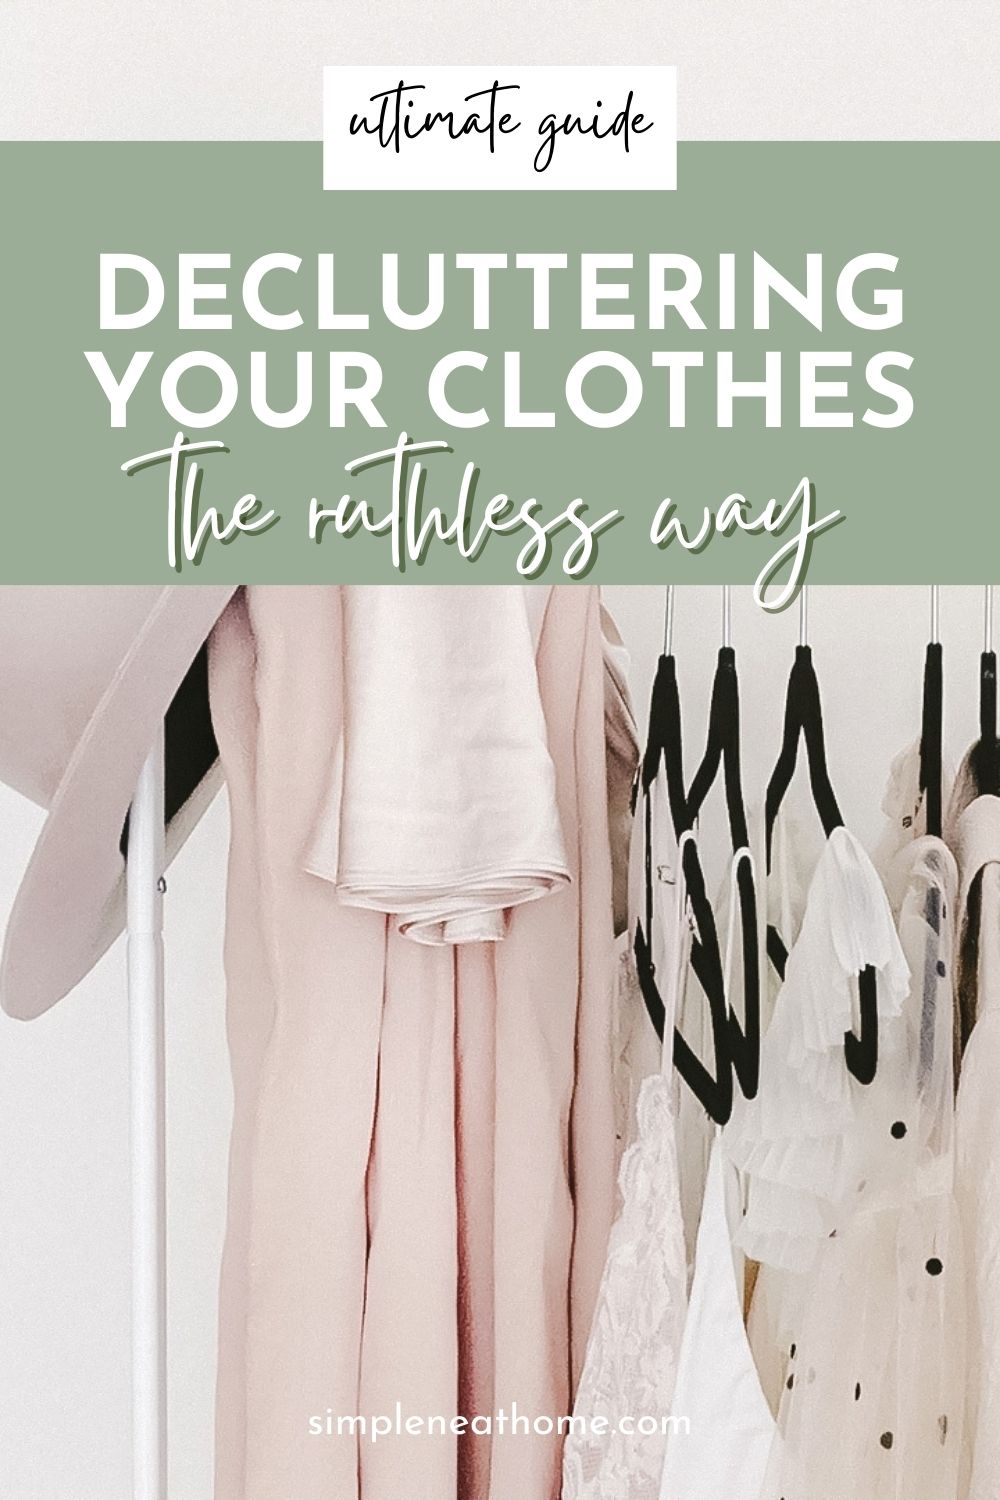 How to be Ruthless when Decluttering Your Clothes